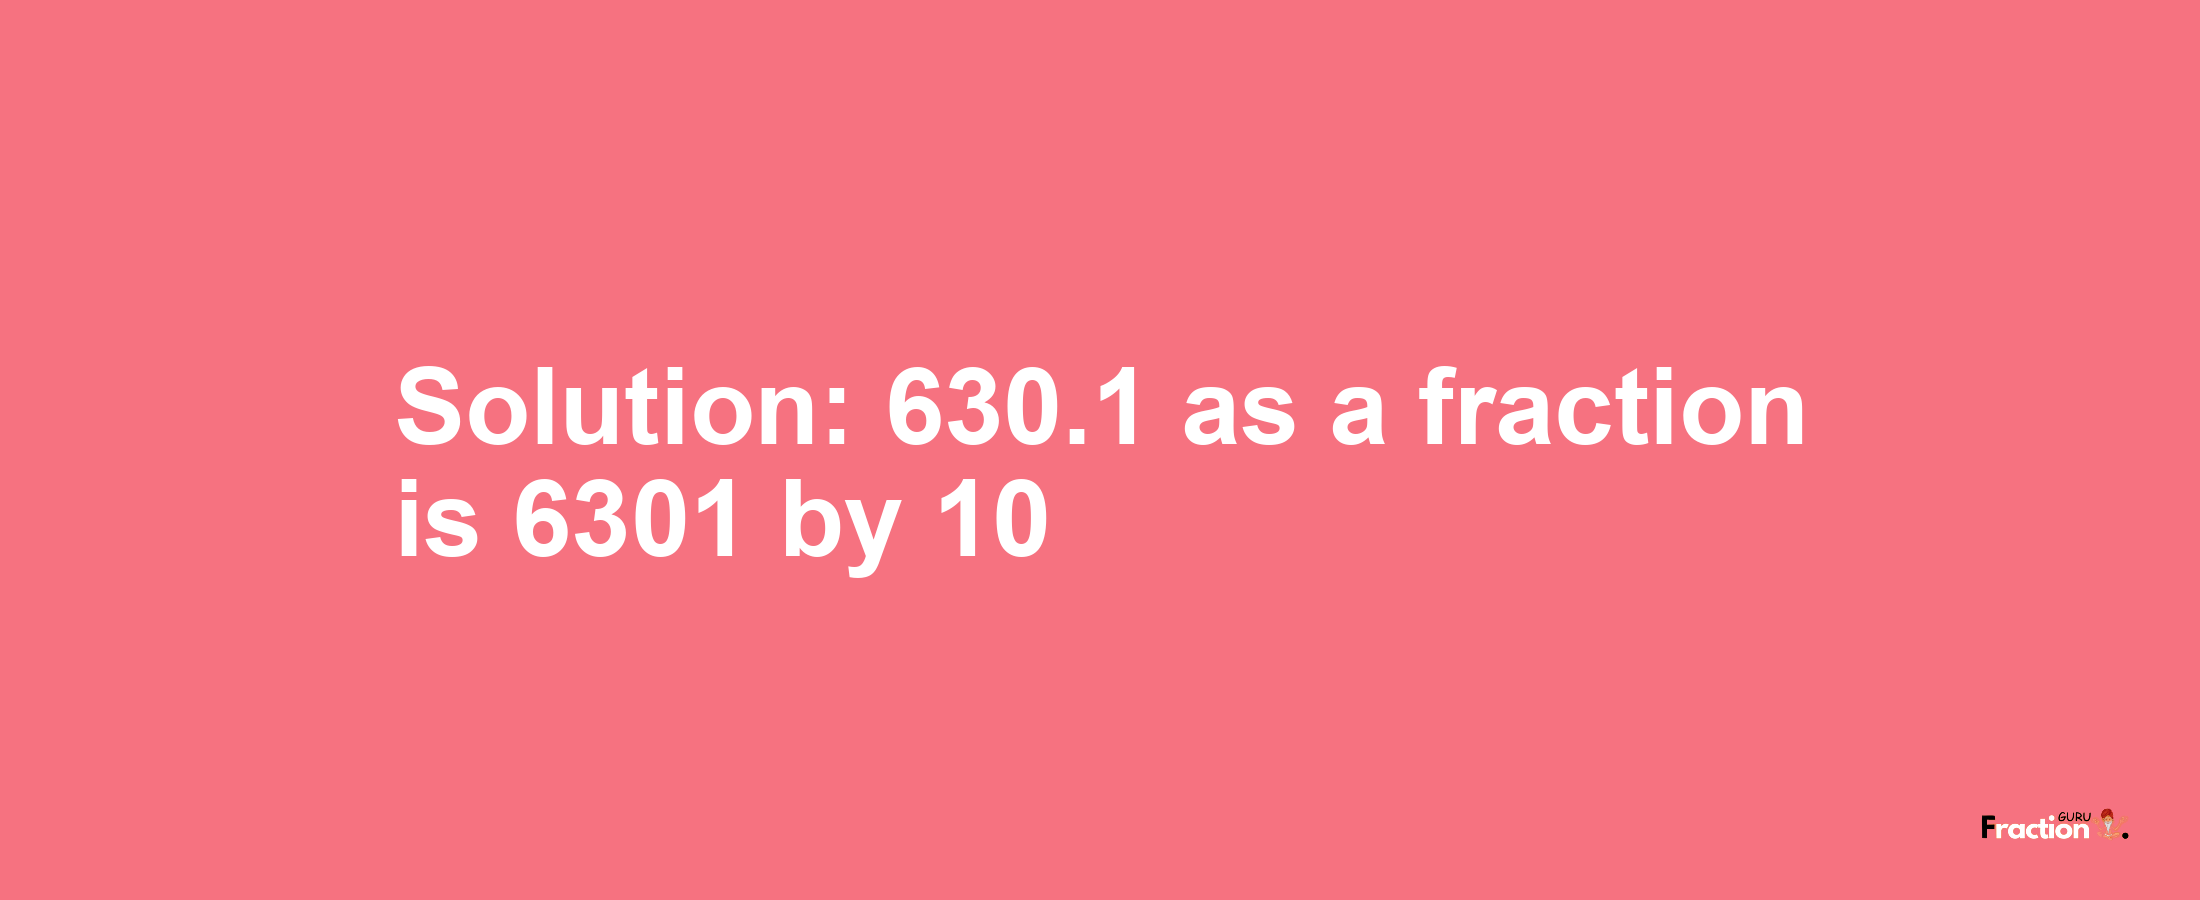 Solution:630.1 as a fraction is 6301/10